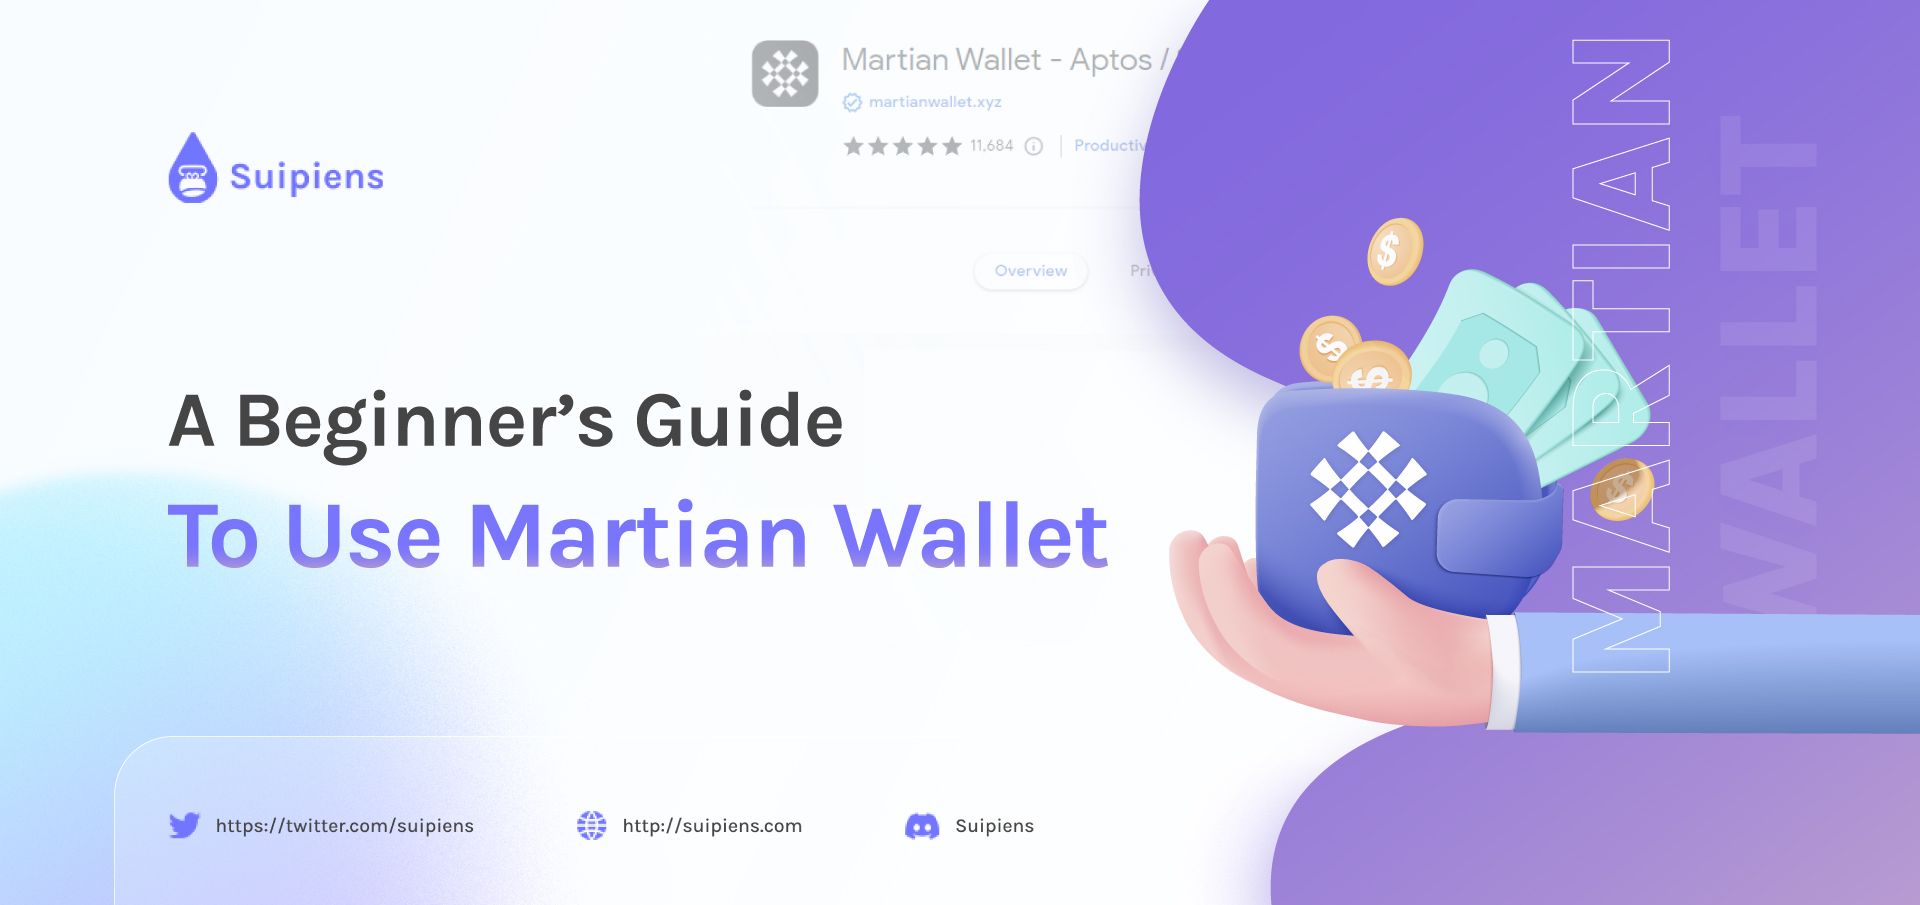 A Beginner’s Guide To Use Martian Wallet